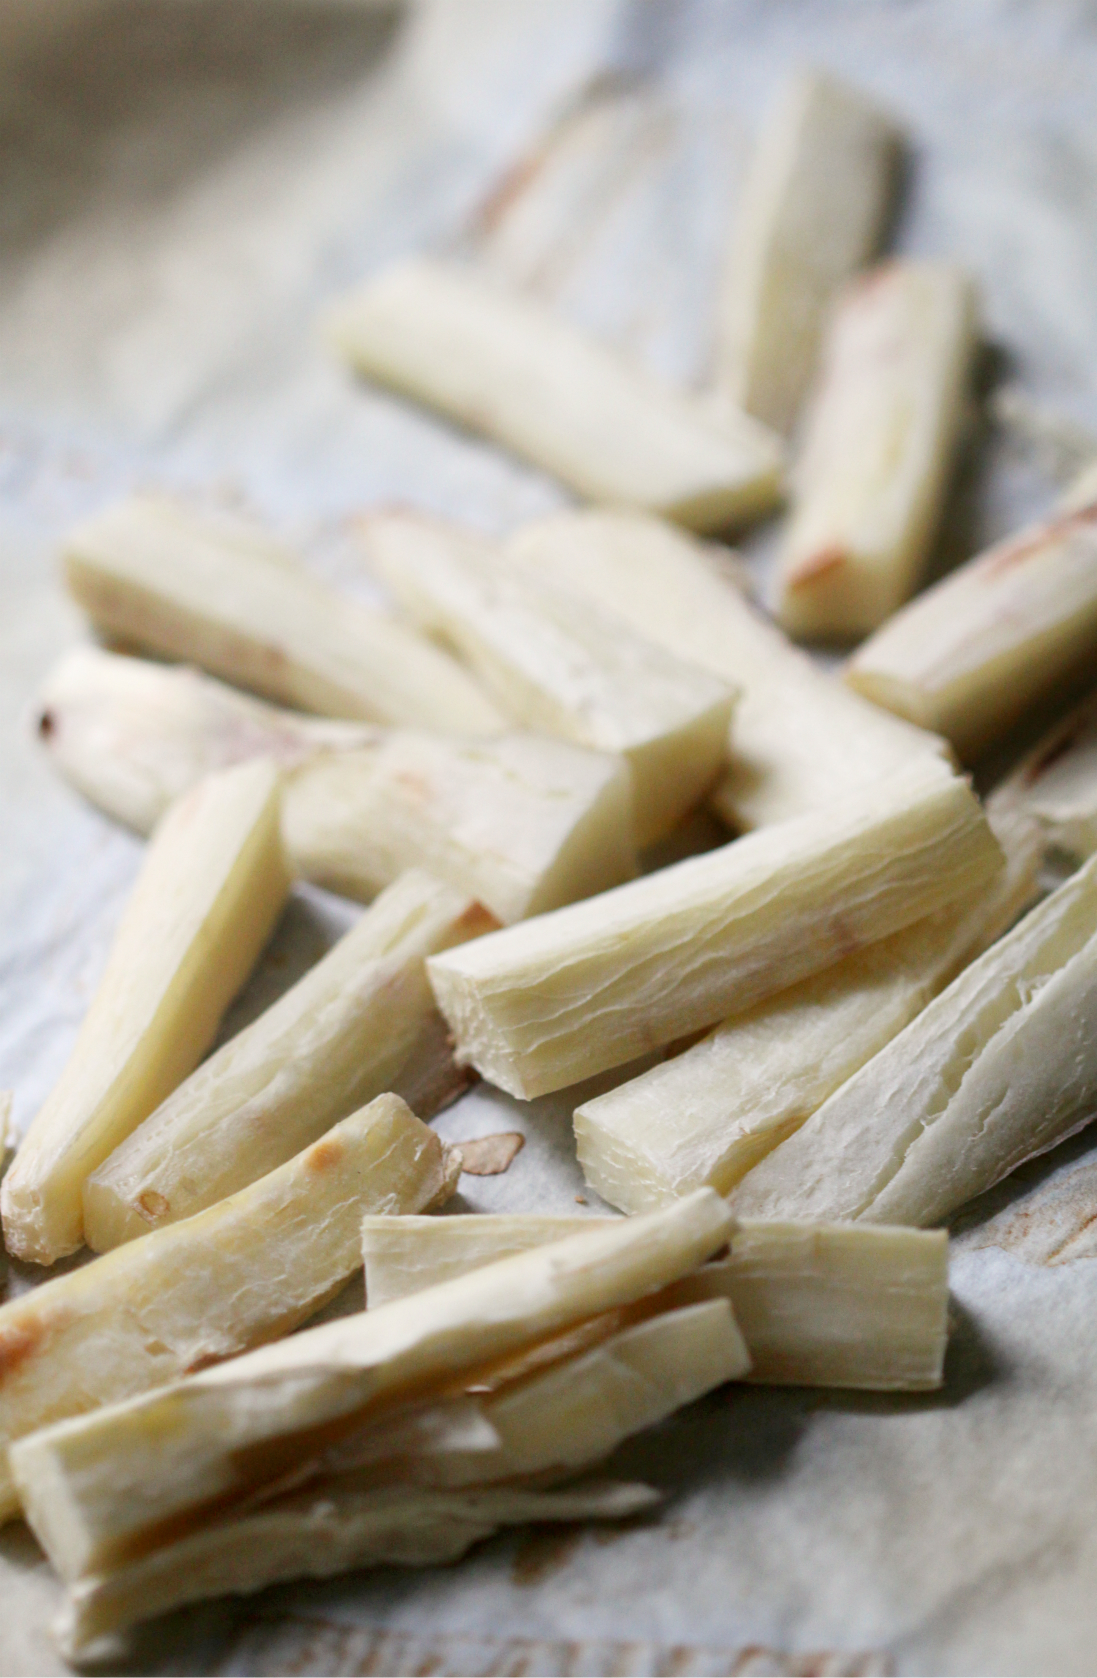 Baked Yucca (Cassava) Fries | Strength and Sunshine @RebeccaGF666 Don't let the "tough" exterior scare you. Yucca (Cassava) root is one delicious plant starch to add to your diet. When prepared properly, you can make the best baked , crispy, creamy, yucca (cassava) fries! Gluten-free, paleo, vegan, and Whole 30 approved side dish!